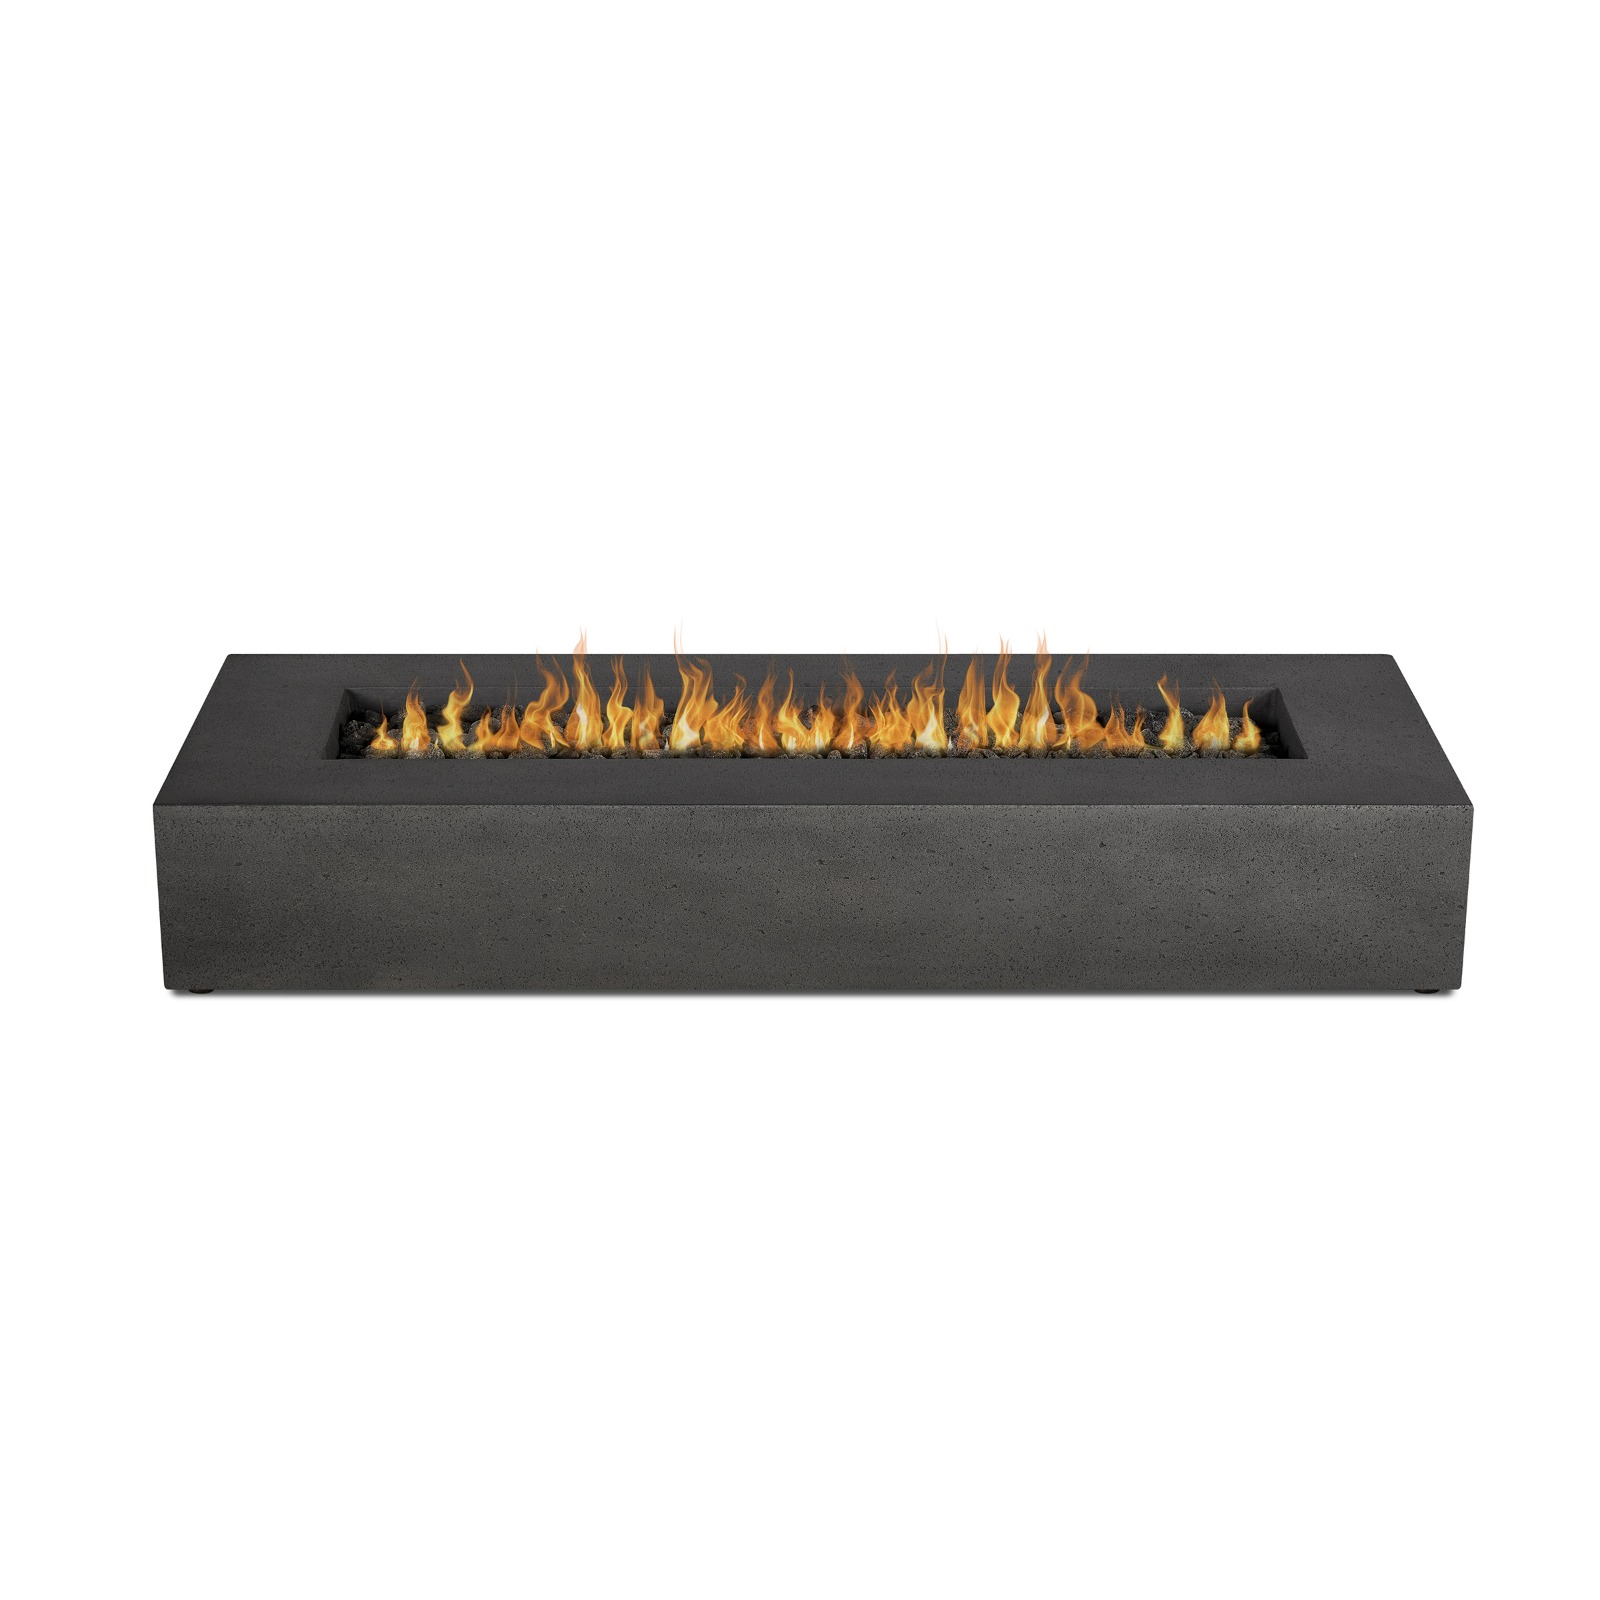 La Valle 72" Rectangle Propane Fire Table in carbon on white